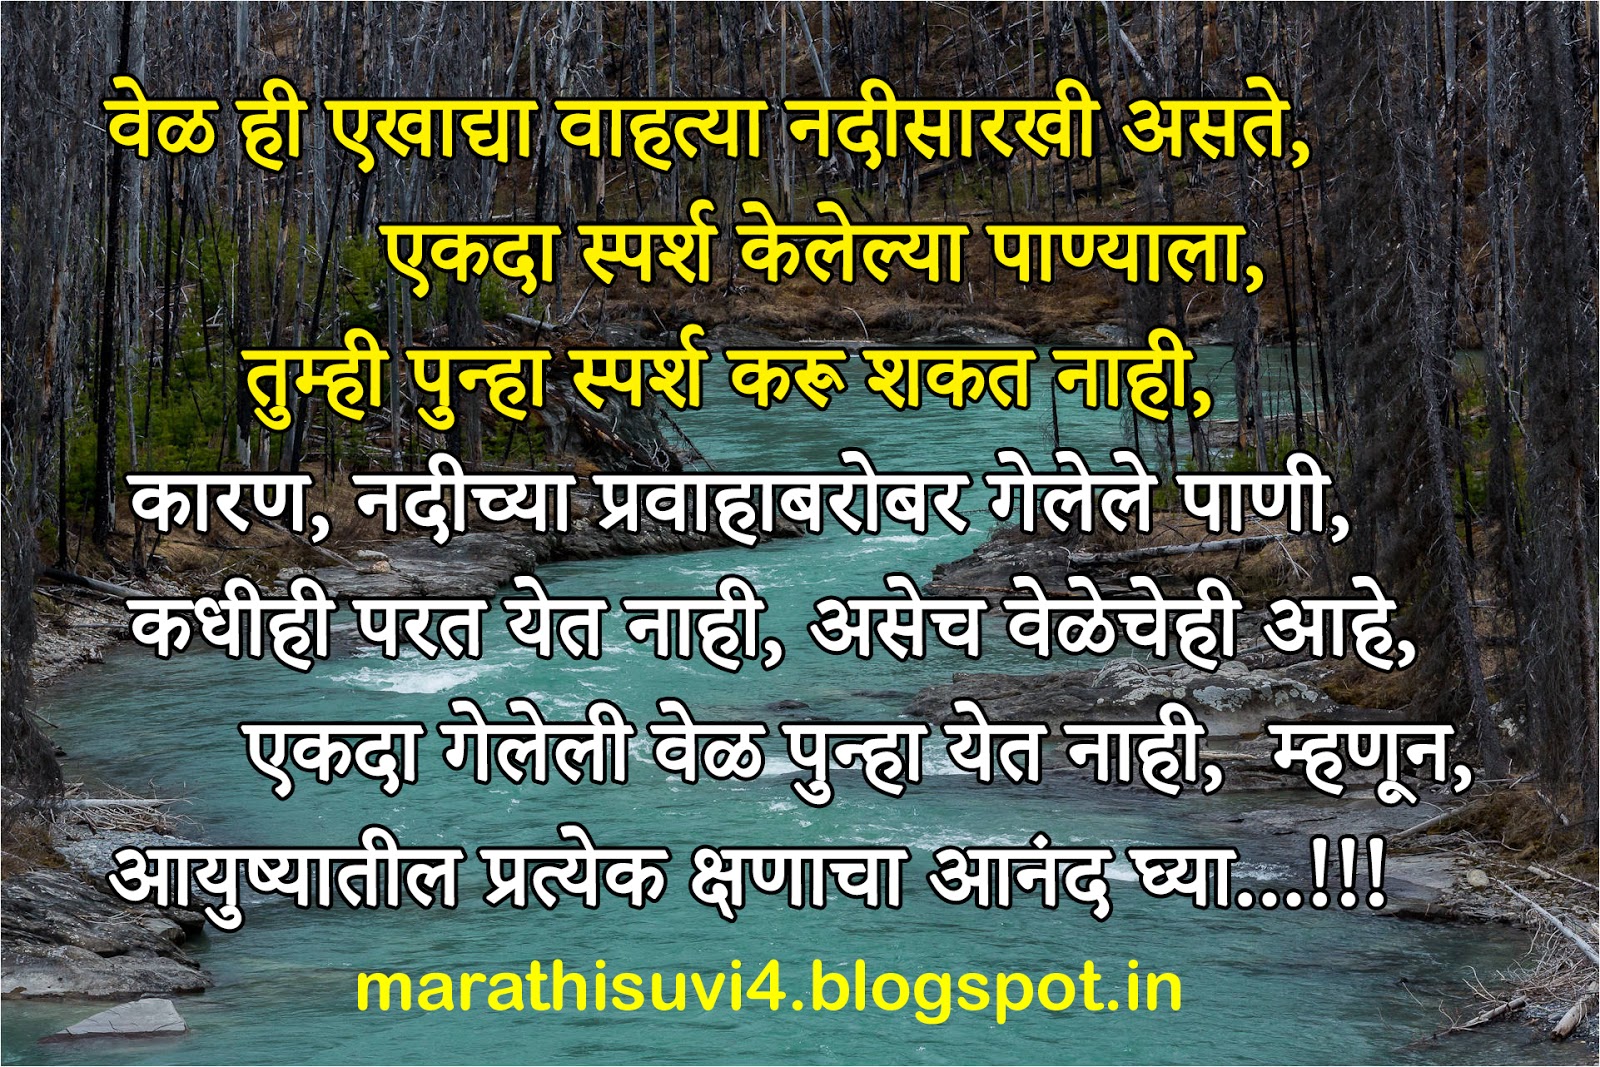 Enjoy every moment of life quotes in Marathi